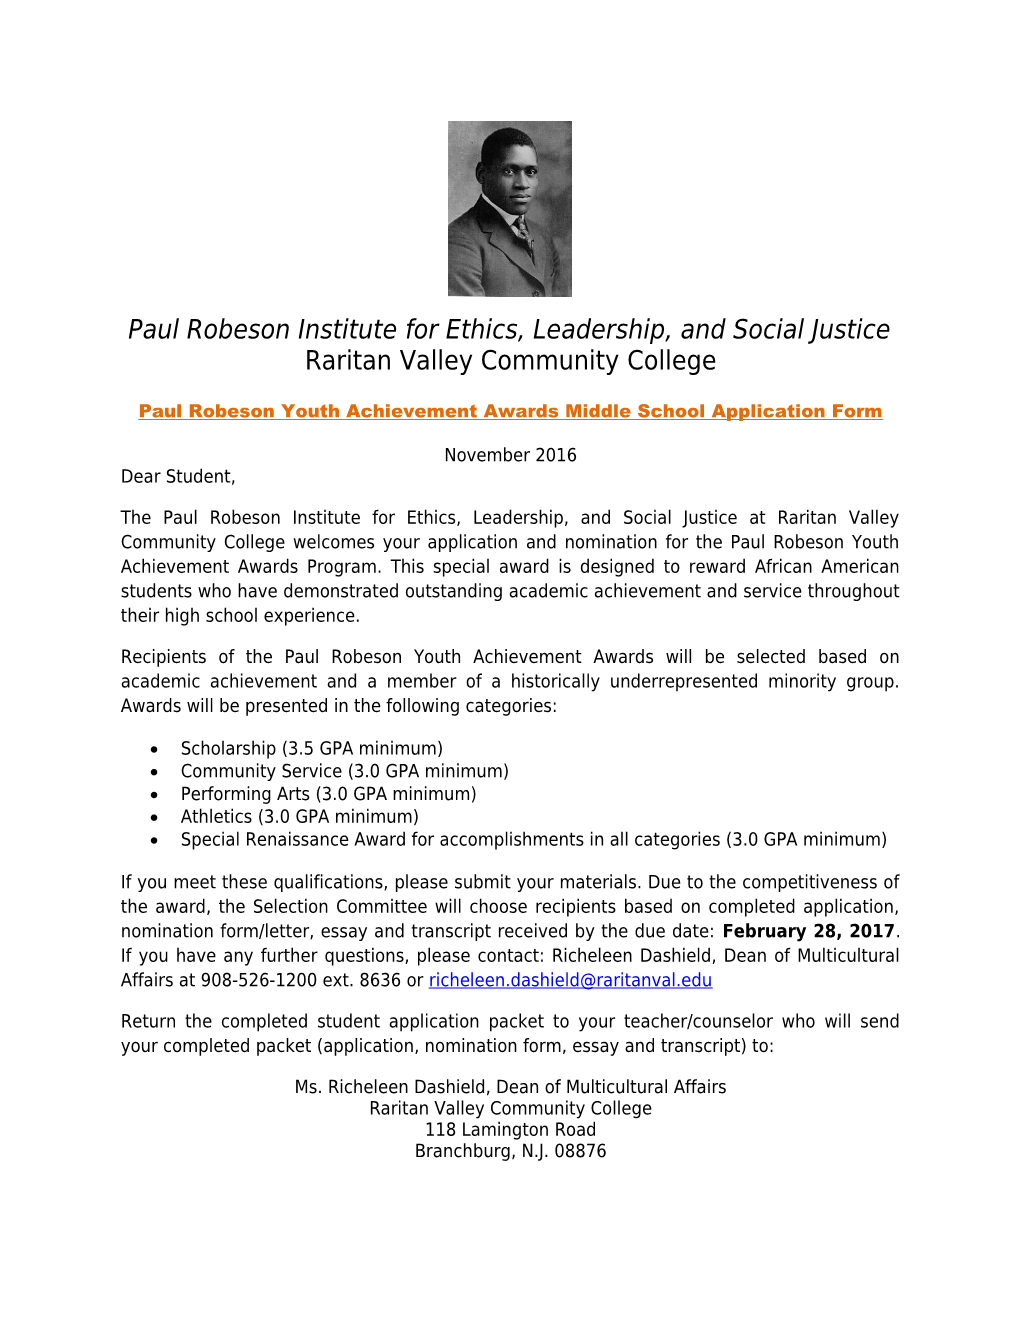 Paul Robeson Institute for Ethics, Leadership, and Social Justice